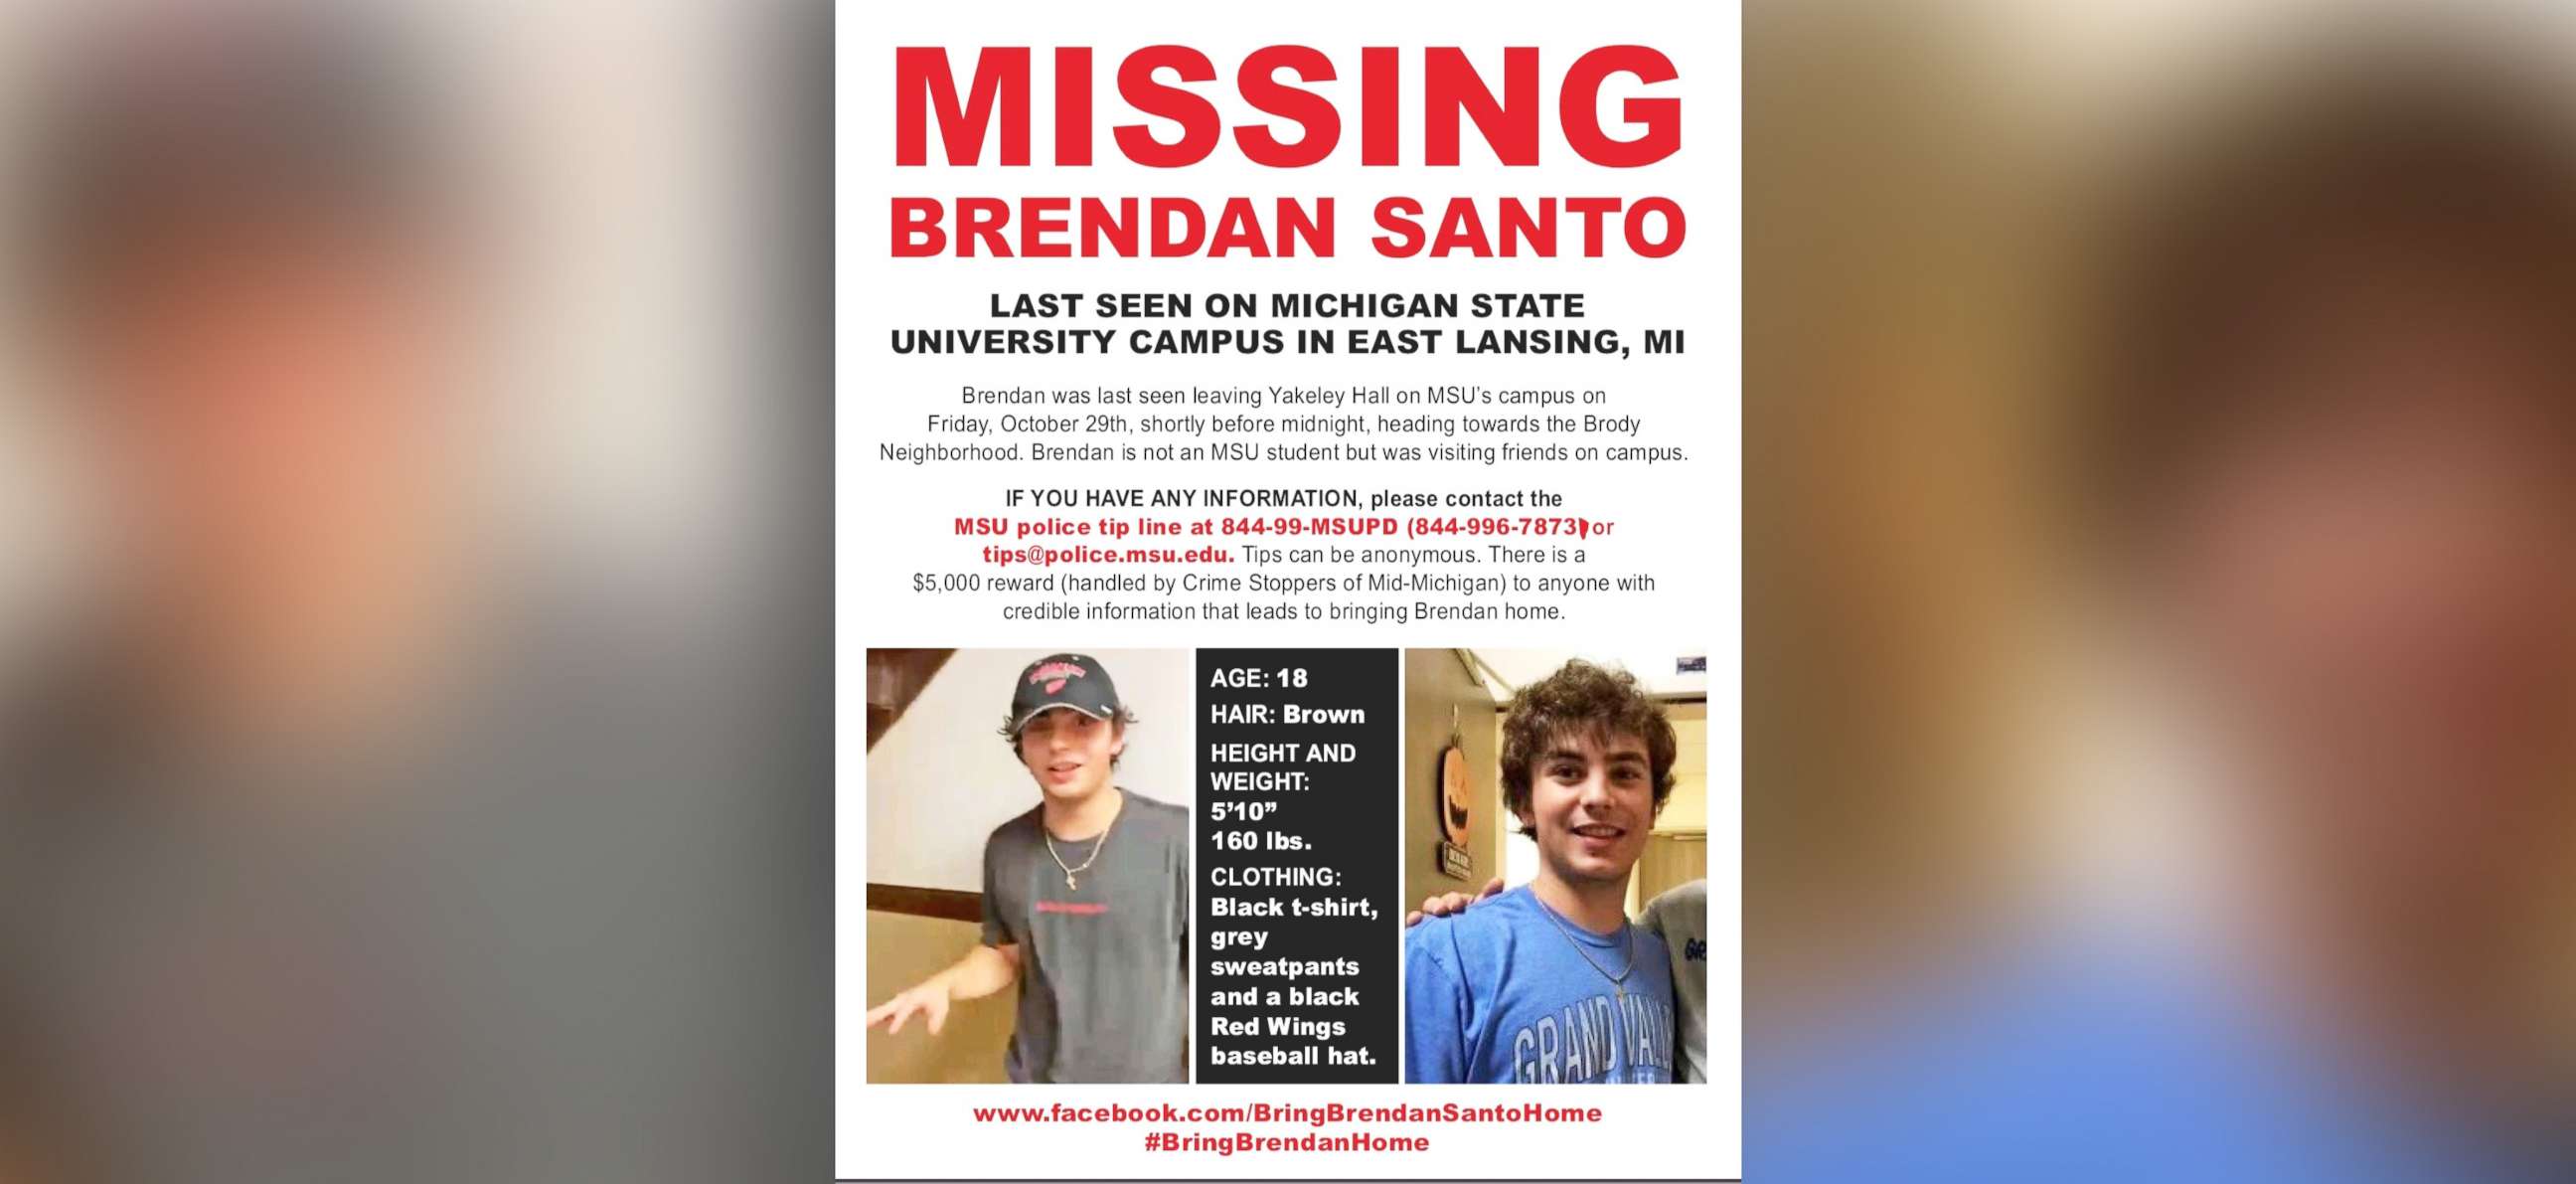 PHOTO: 18- year old named Brendan Santo has gone missing after visiting friends at Michigan State.